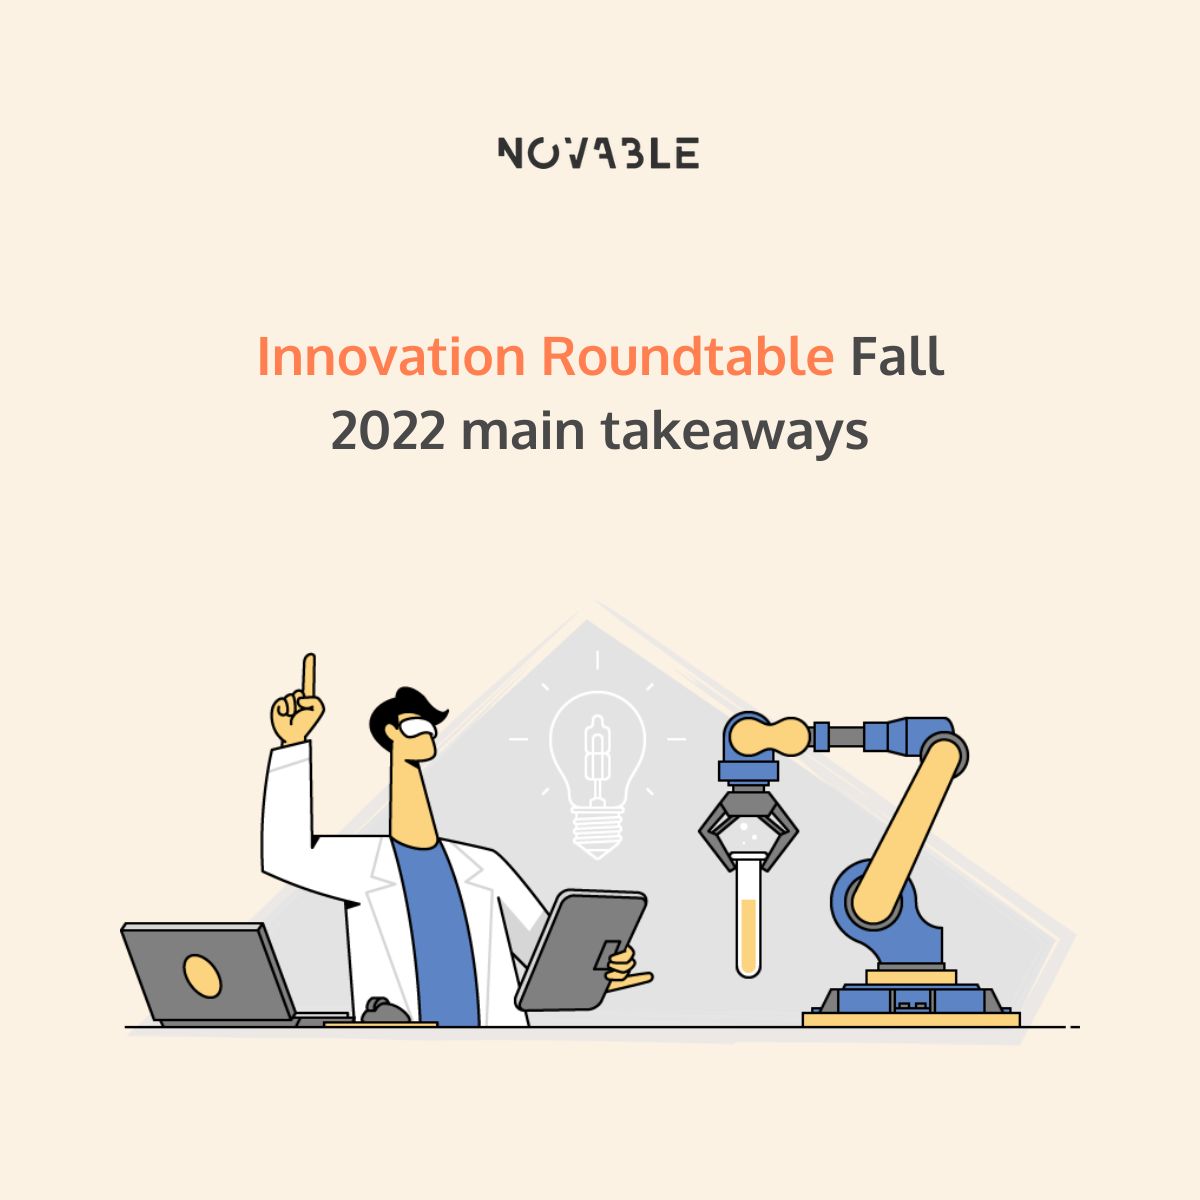 Innovation Roundtable Summit fall 2022